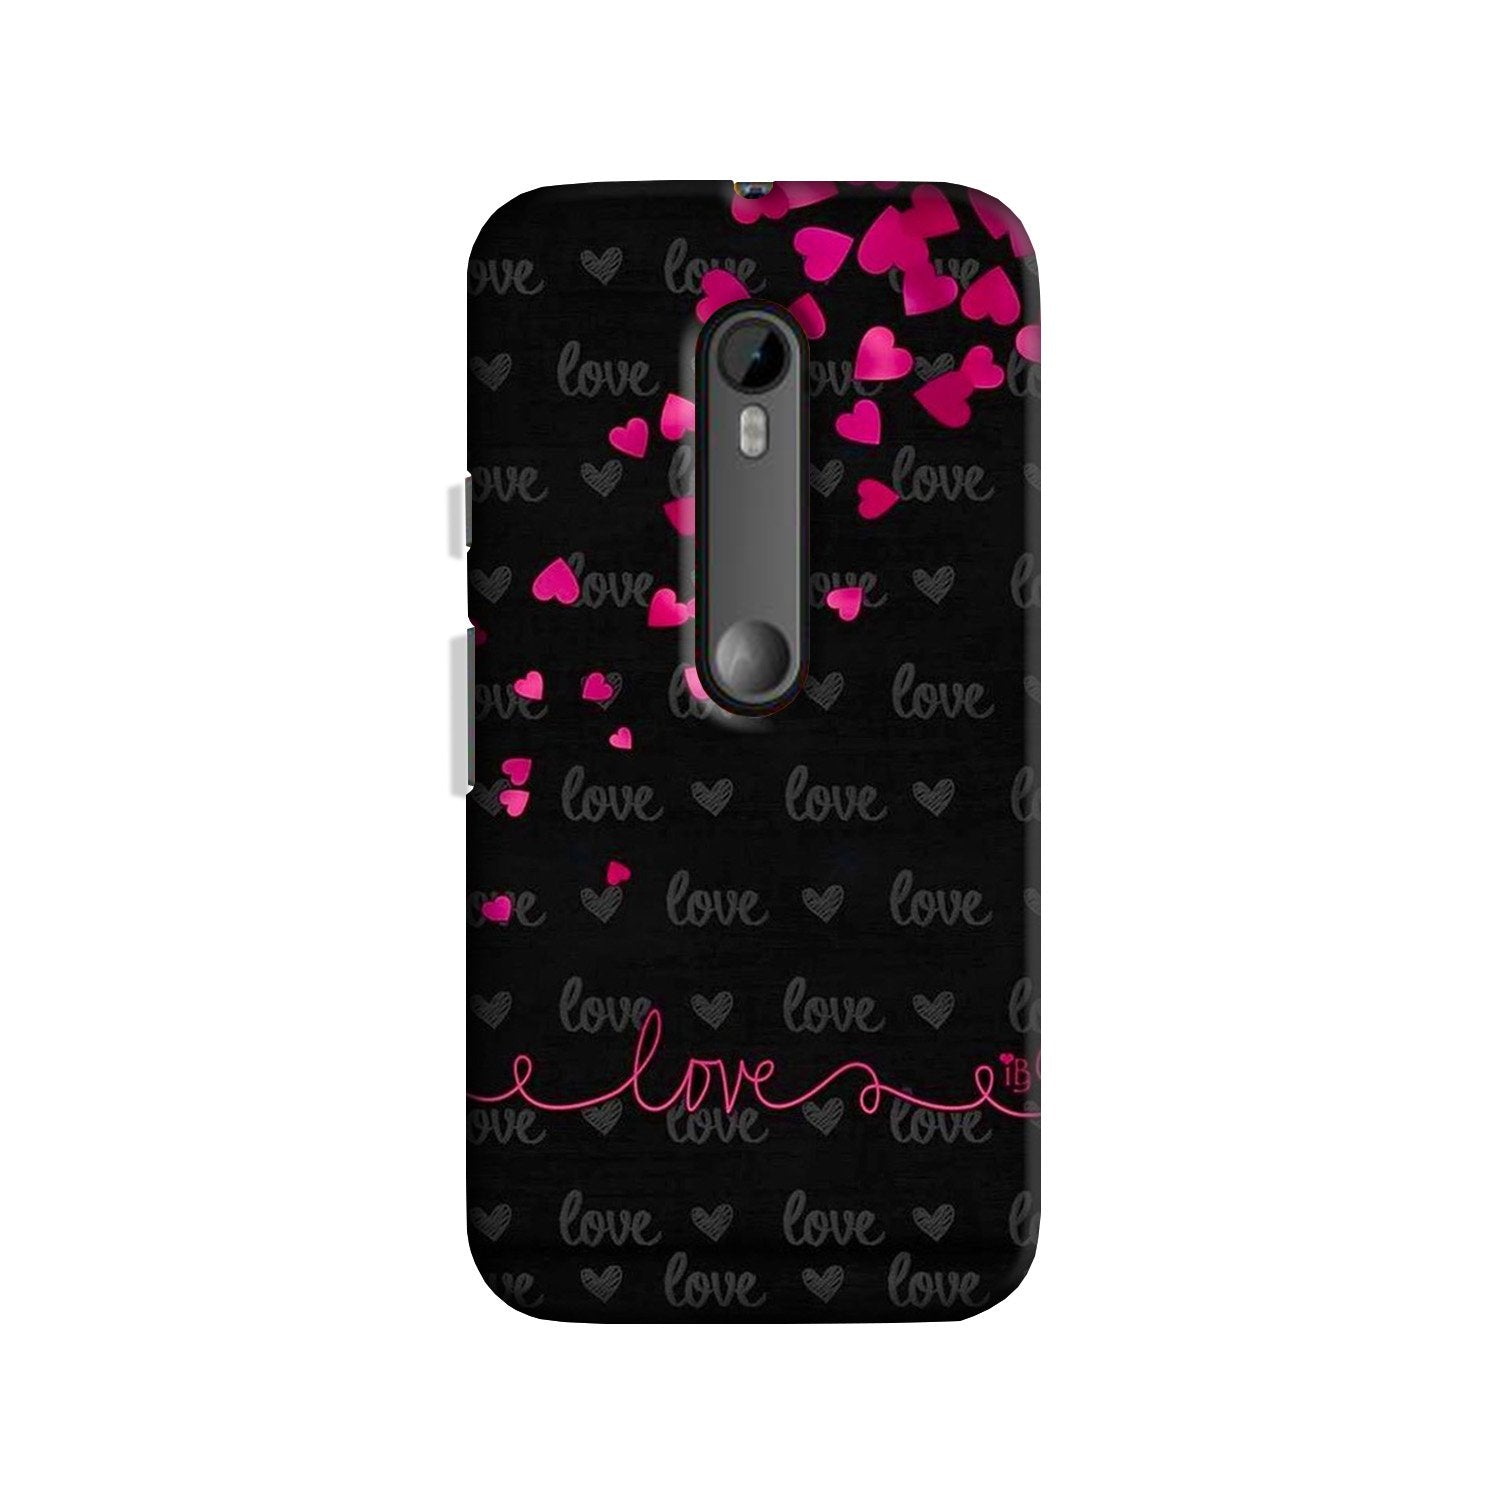 Love in Air Case for Moto X Style